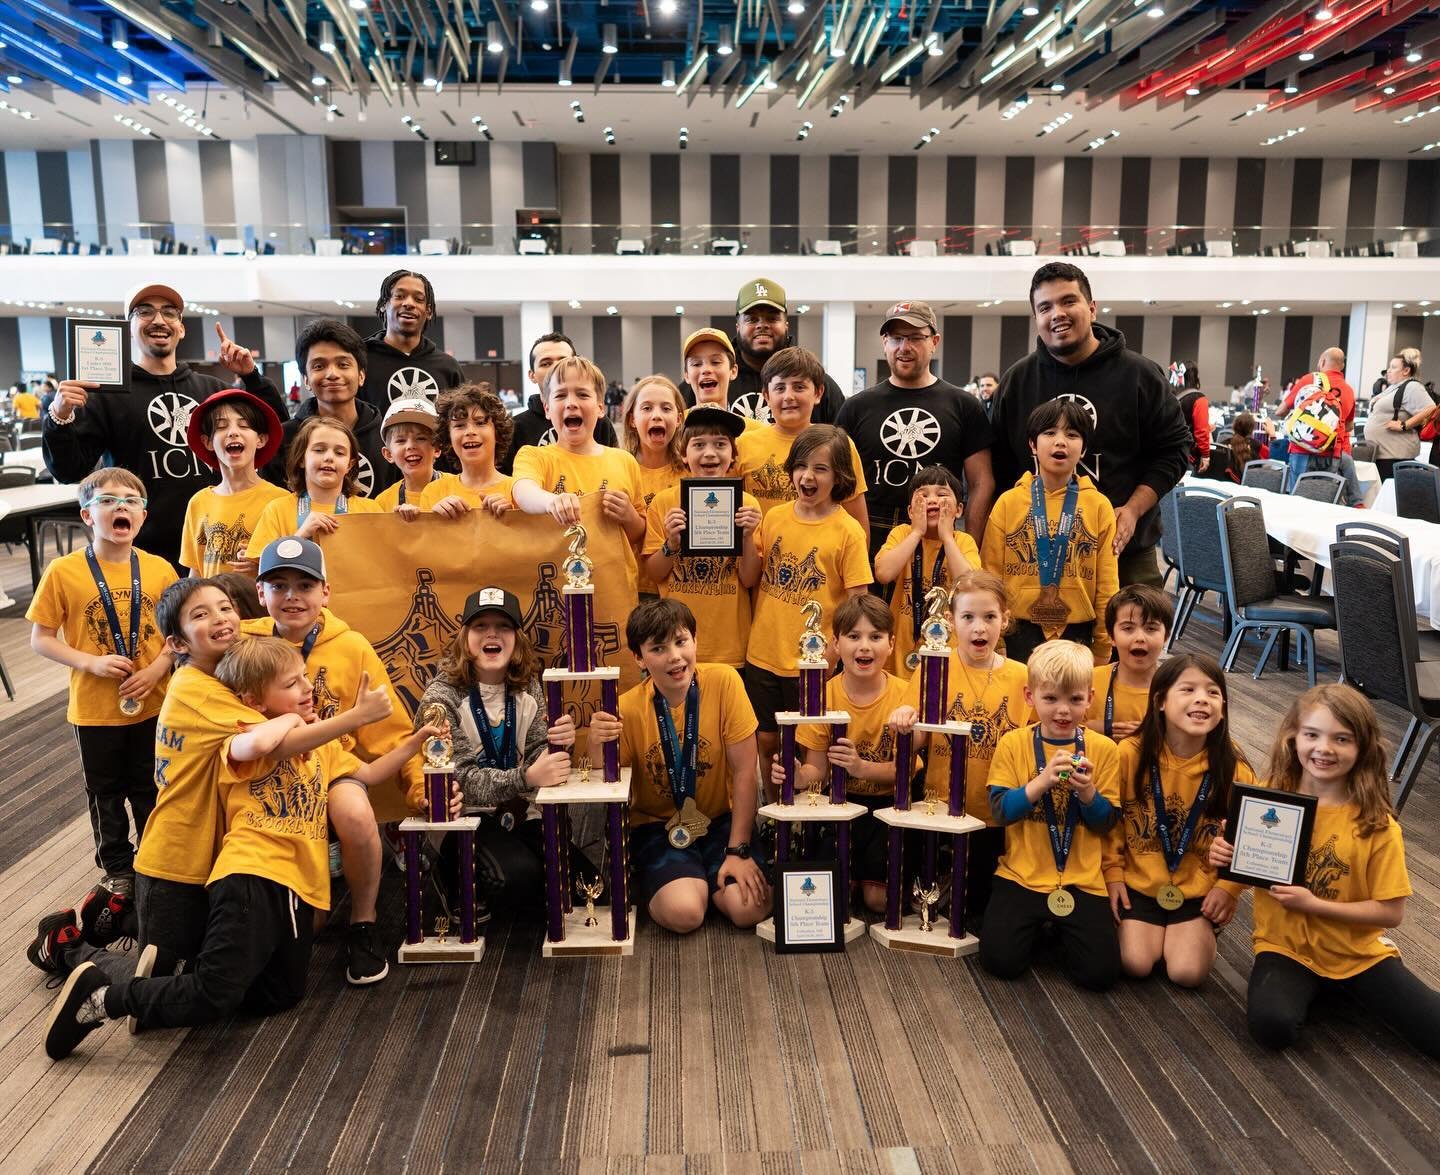 Congratulations to our PS 130 Brooklyn Lions for their amazing performance at the Elementary Nationals! 🦁

PS 130K wins the K-5 Under 900 section for the third year in a row. They also finished top 5 in the K1 &amp; K3 championship sections, plus a 